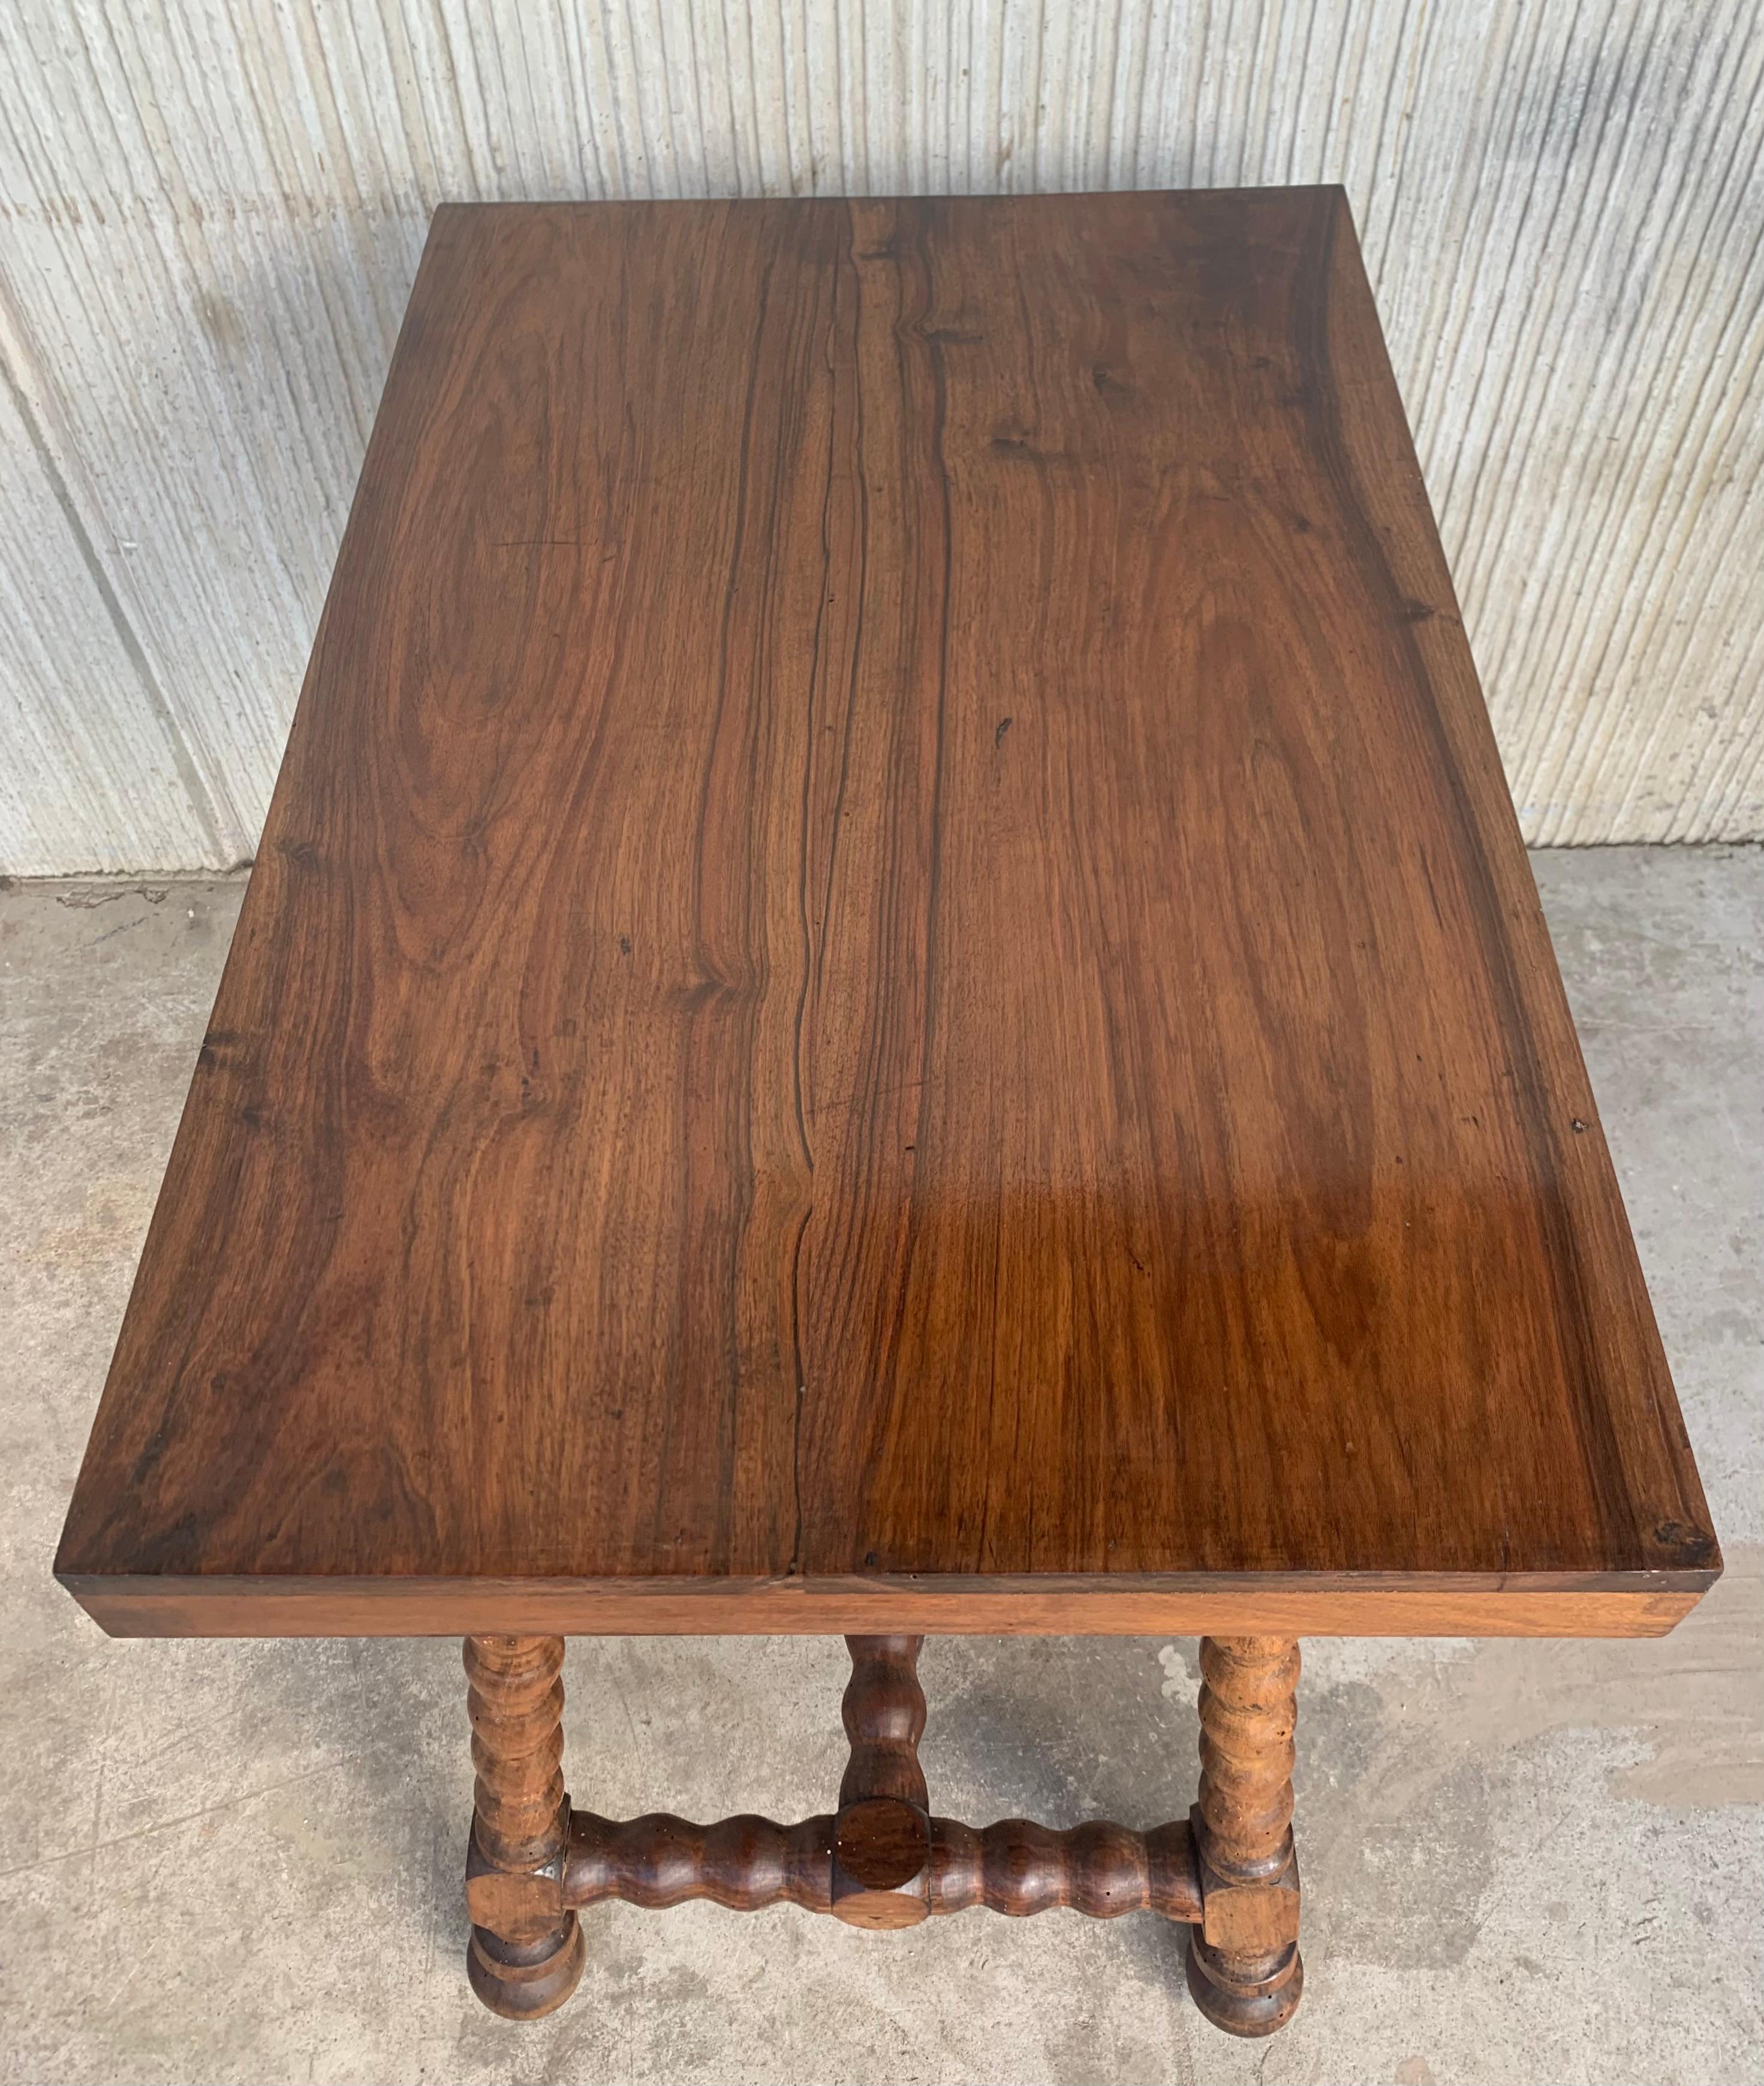 19th Spanish Walnut Side Table with Lyre Legs, Flat Top and Iron Stretcher For Sale 2